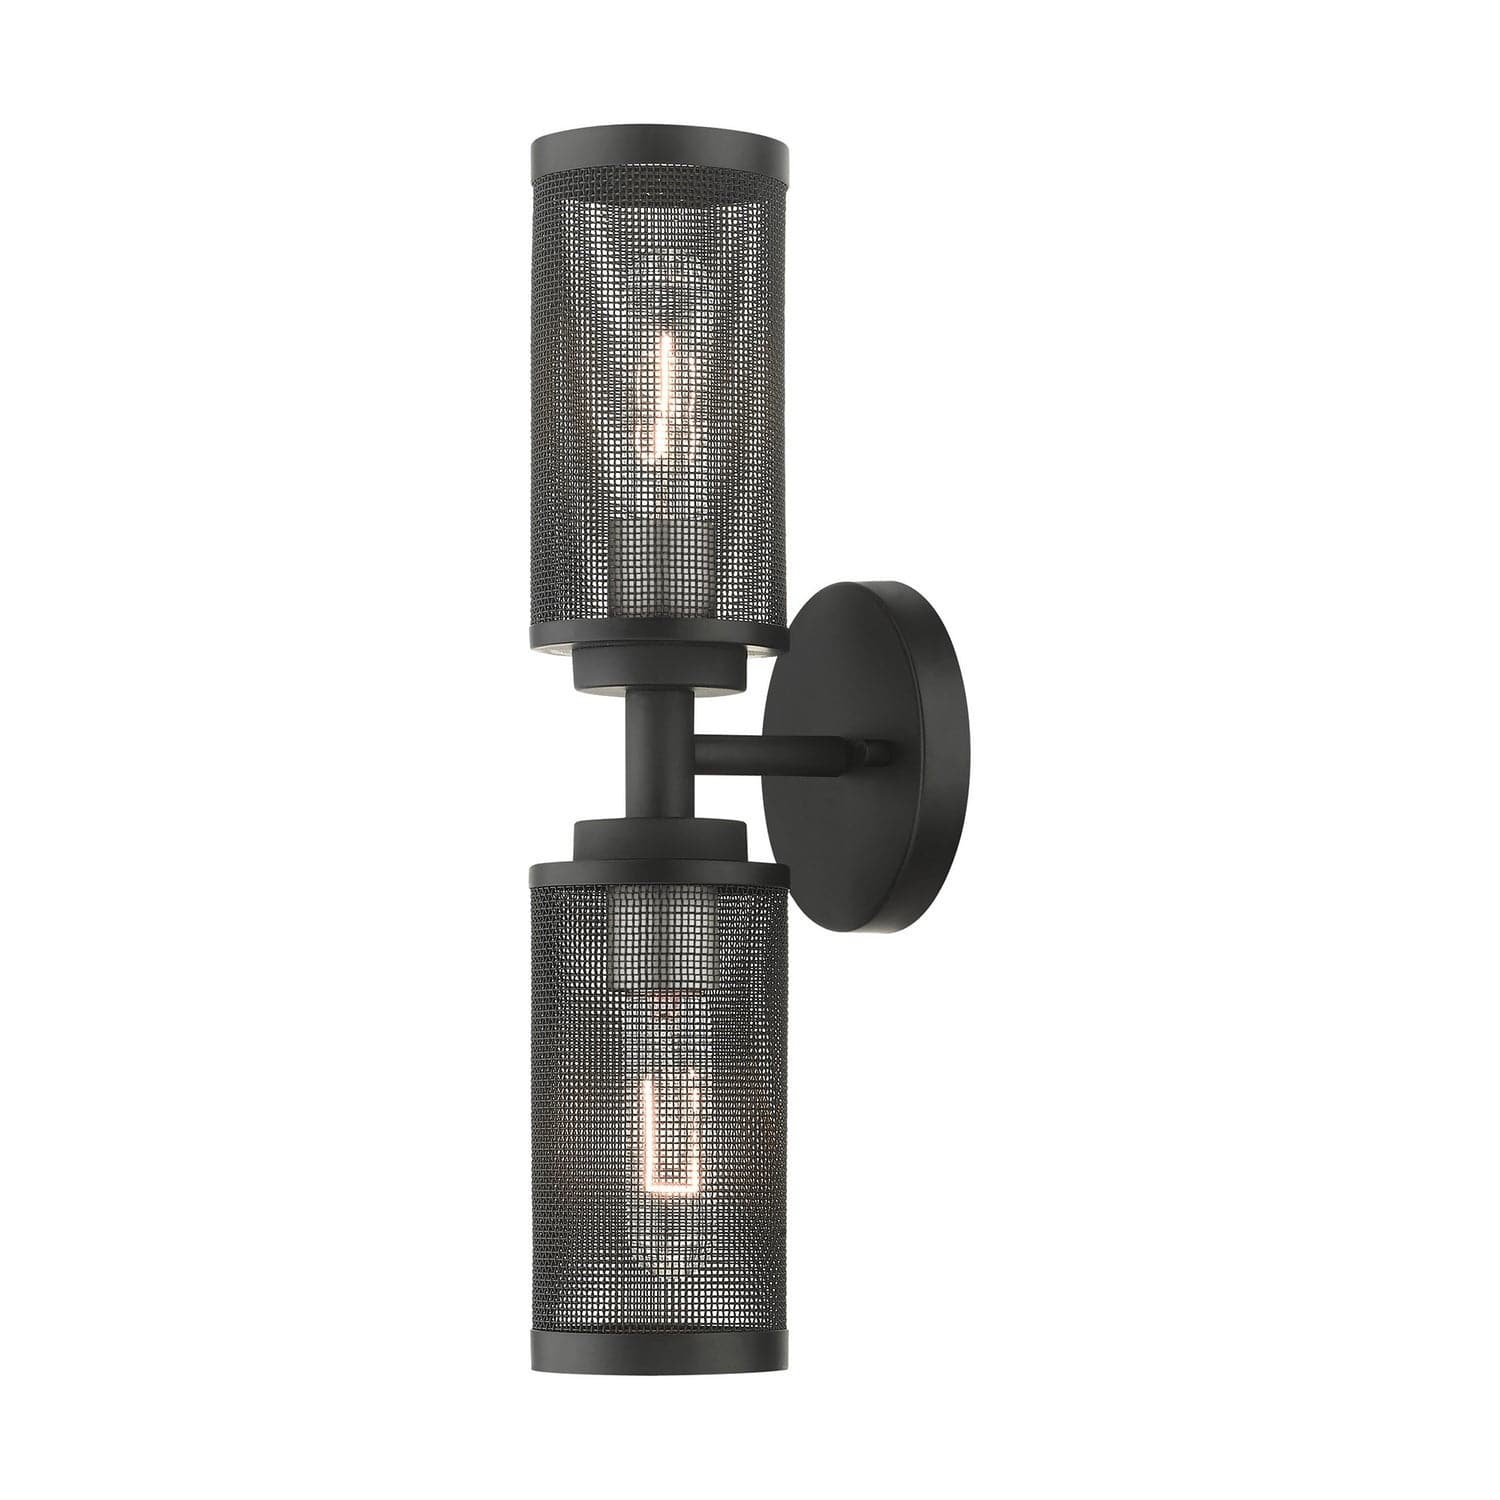 Livex Lighting - 14122-04 - Two Light Wall Sconce - Industro - Black w/ Brushed Nickels